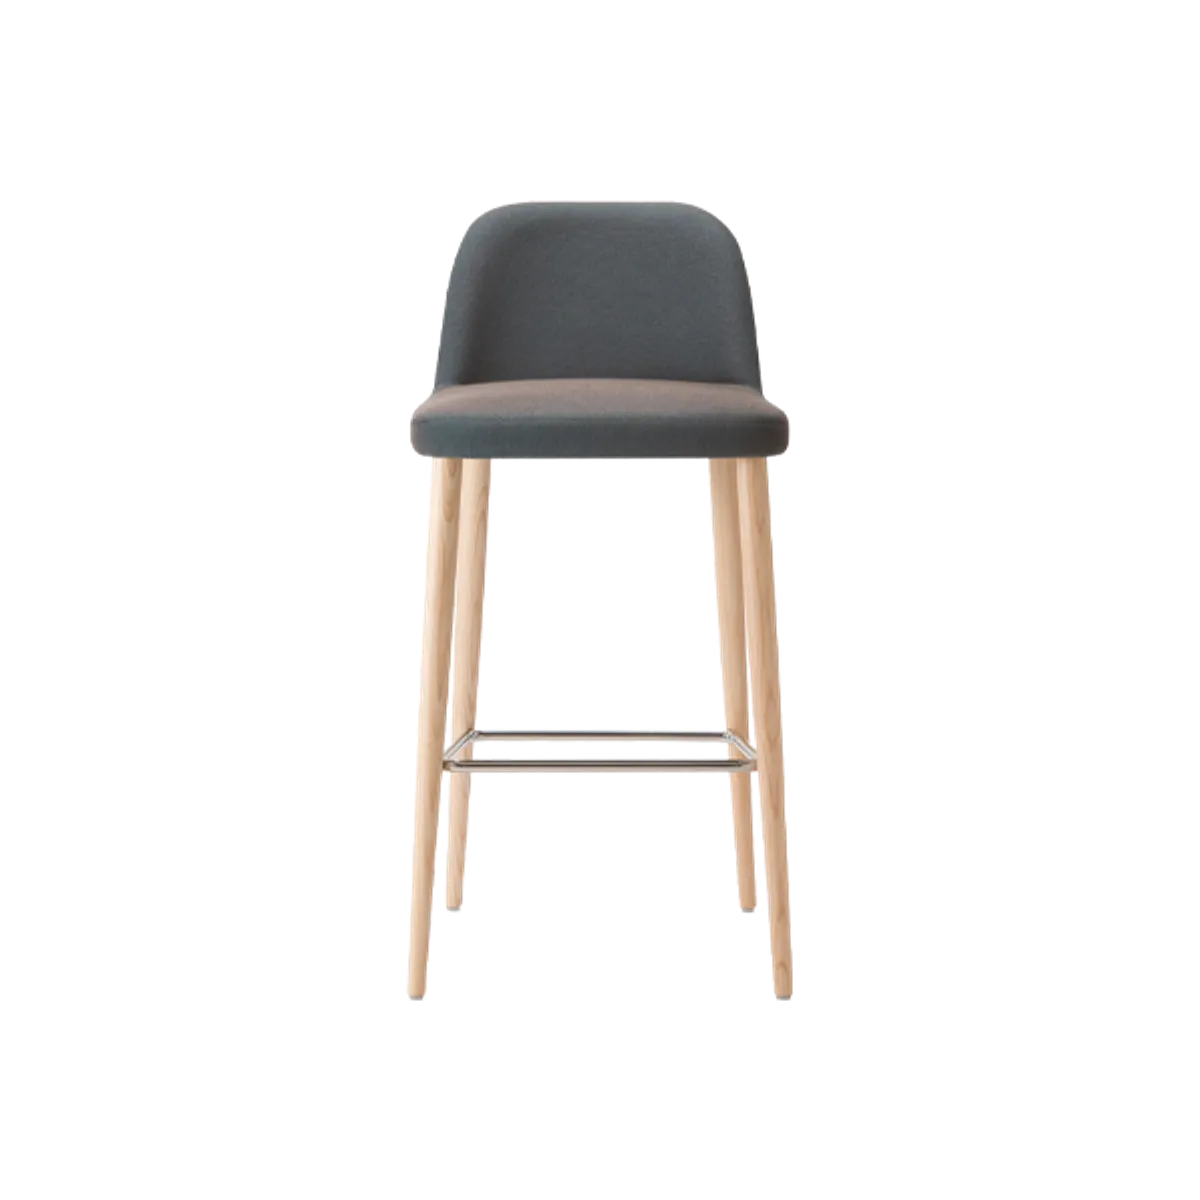 Hampstead Bar Stool 101 Low Back Inside Out Contracts